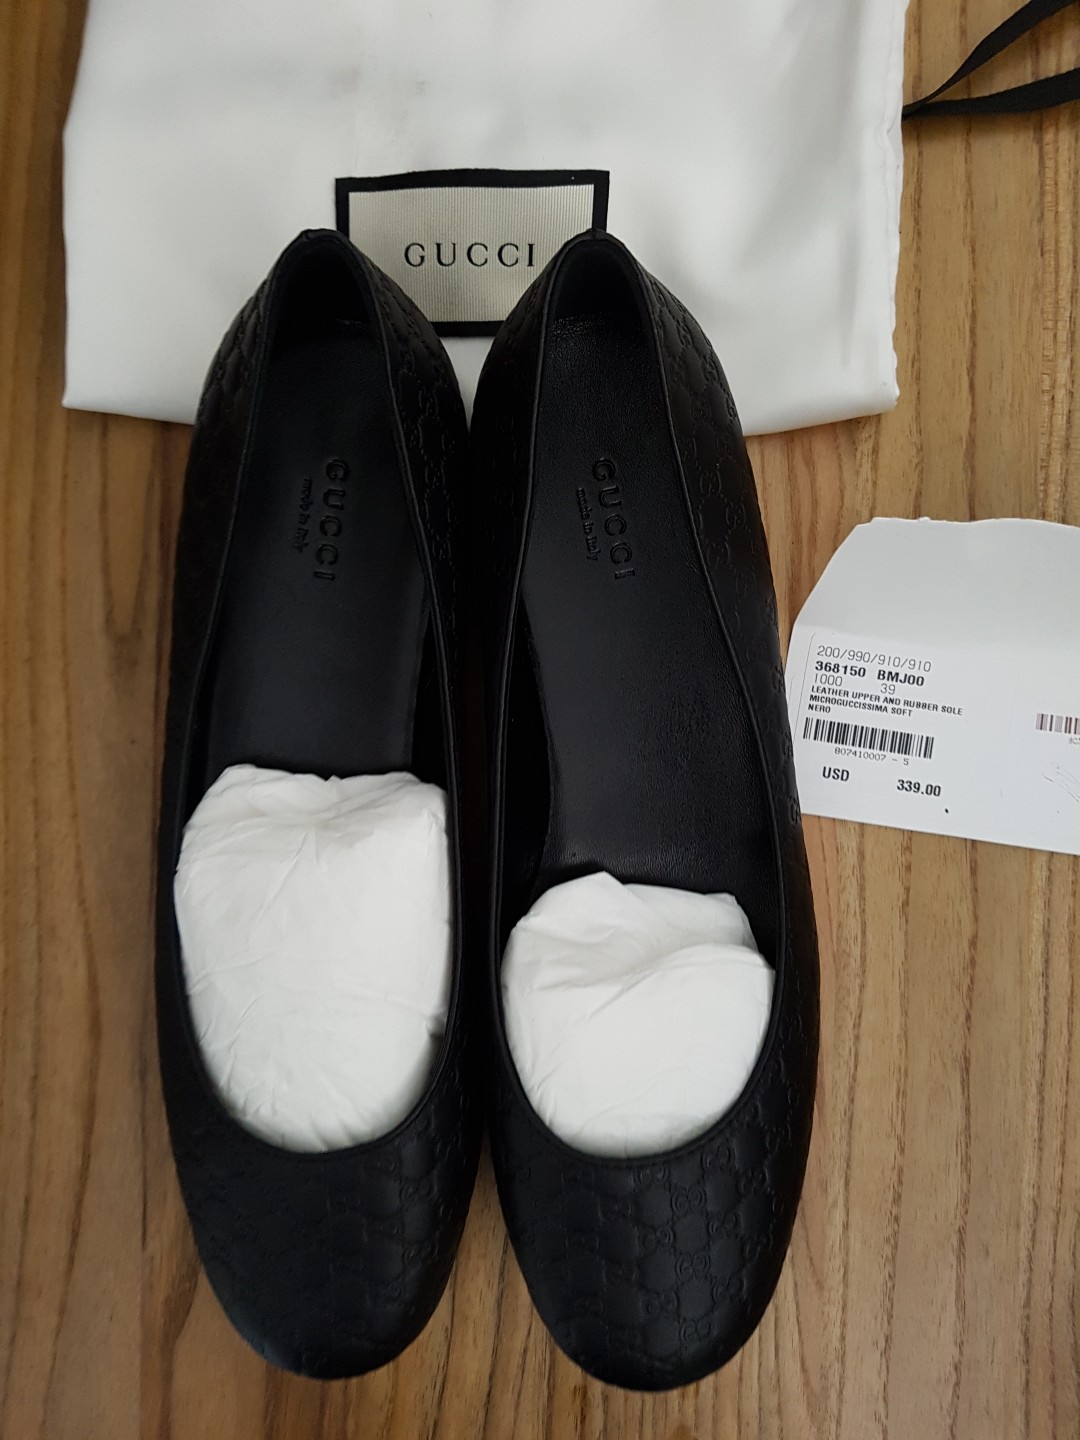 gucci flat shoes price